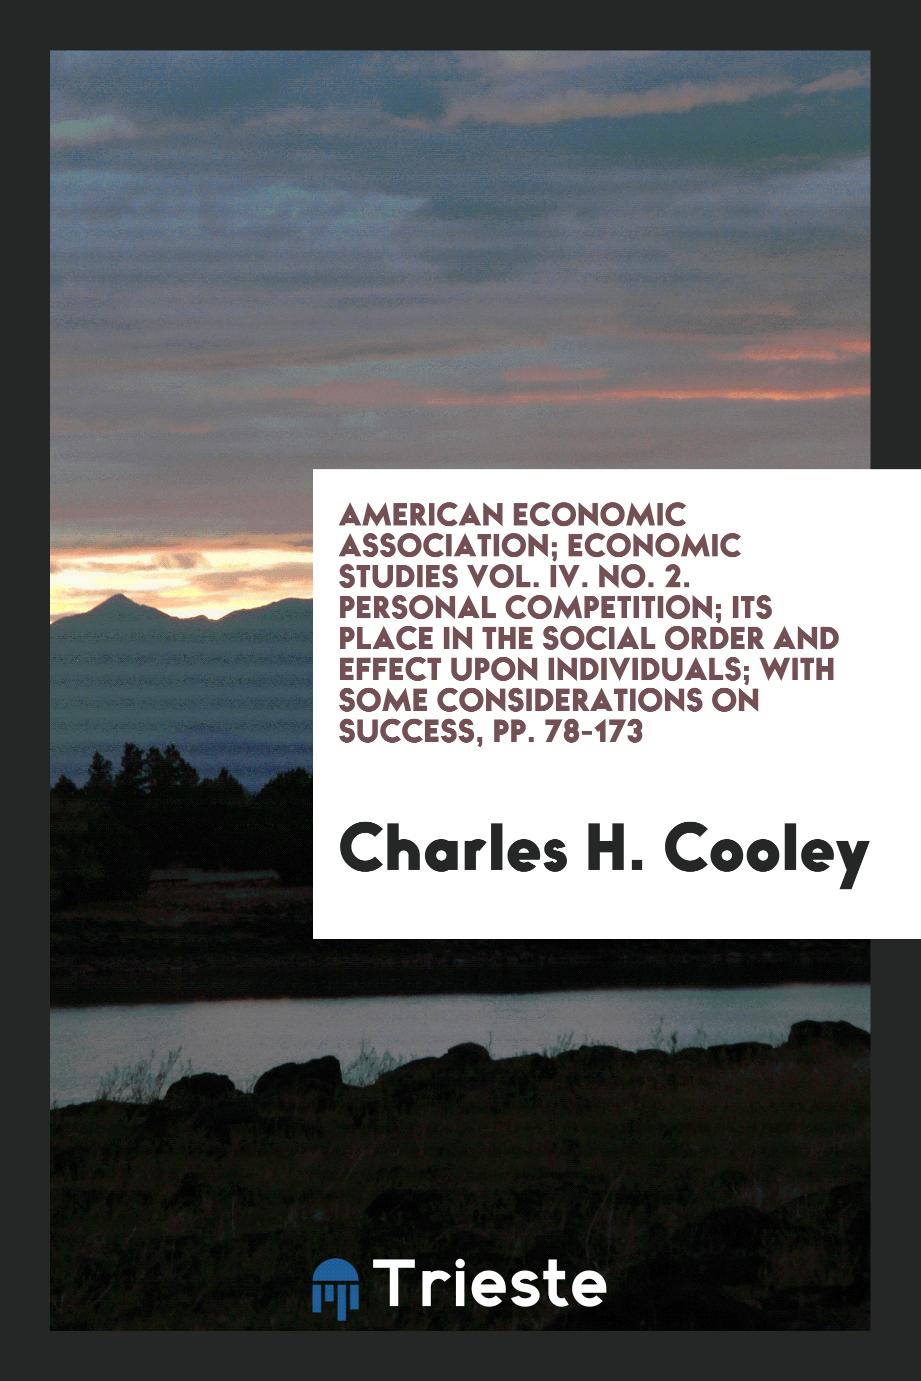 American Economic Association; Economic Studies Vol. IV. No. 2. Personal Competition; Its Place in the Social Order and Effect Upon Individuals; with Some Considerations on Success, pp. 78-173